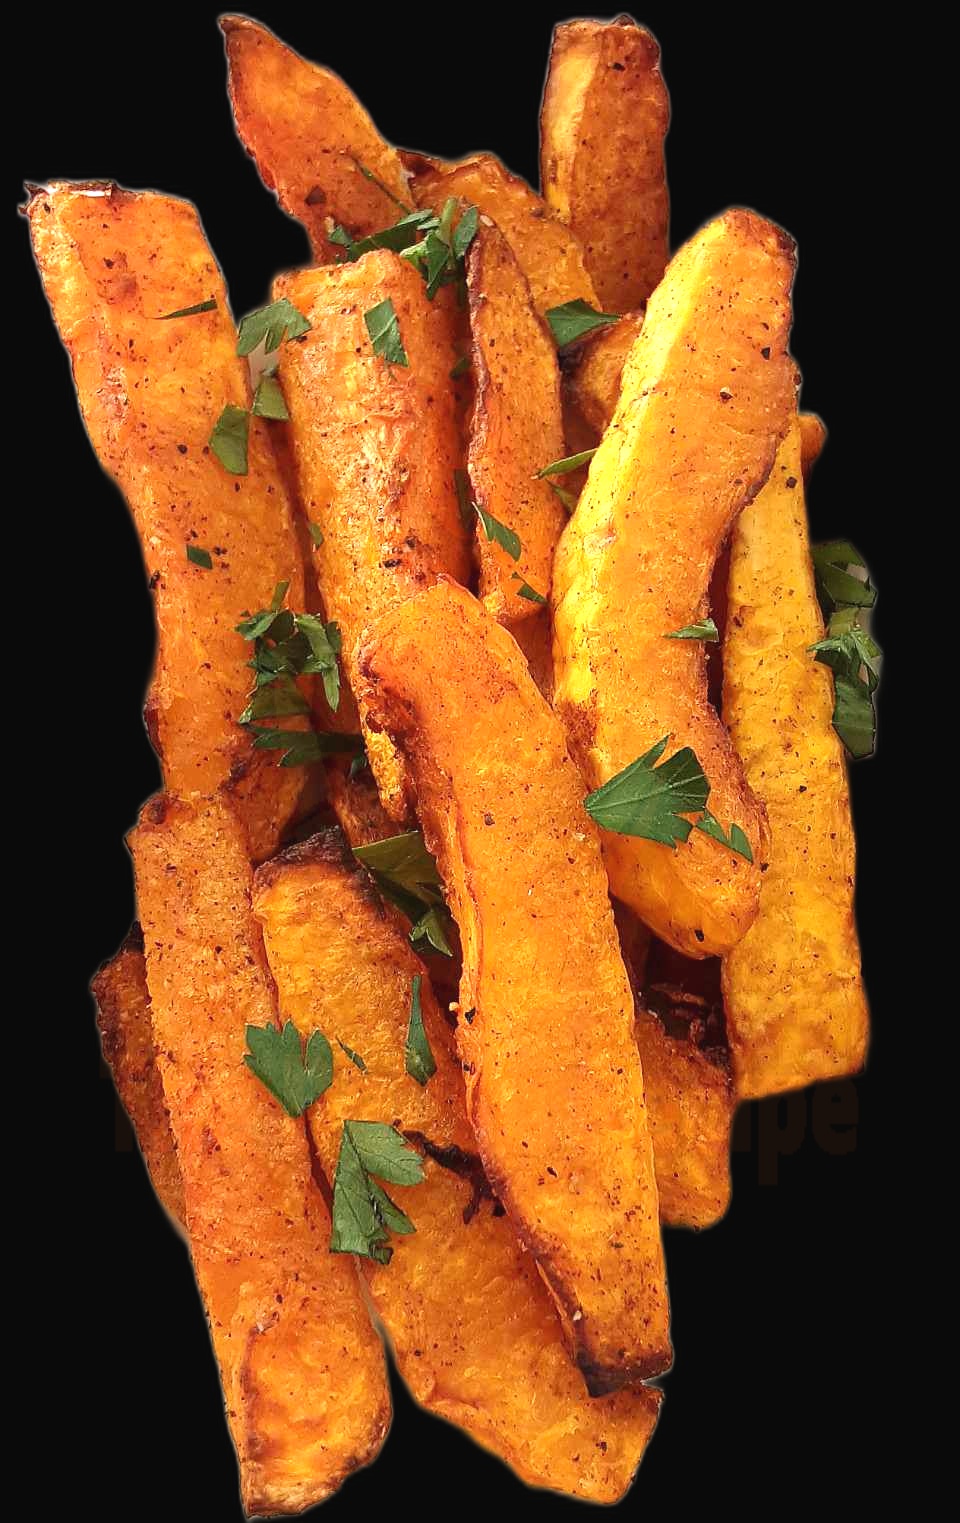 Chinese Five-Spice Butternut Squash Fries